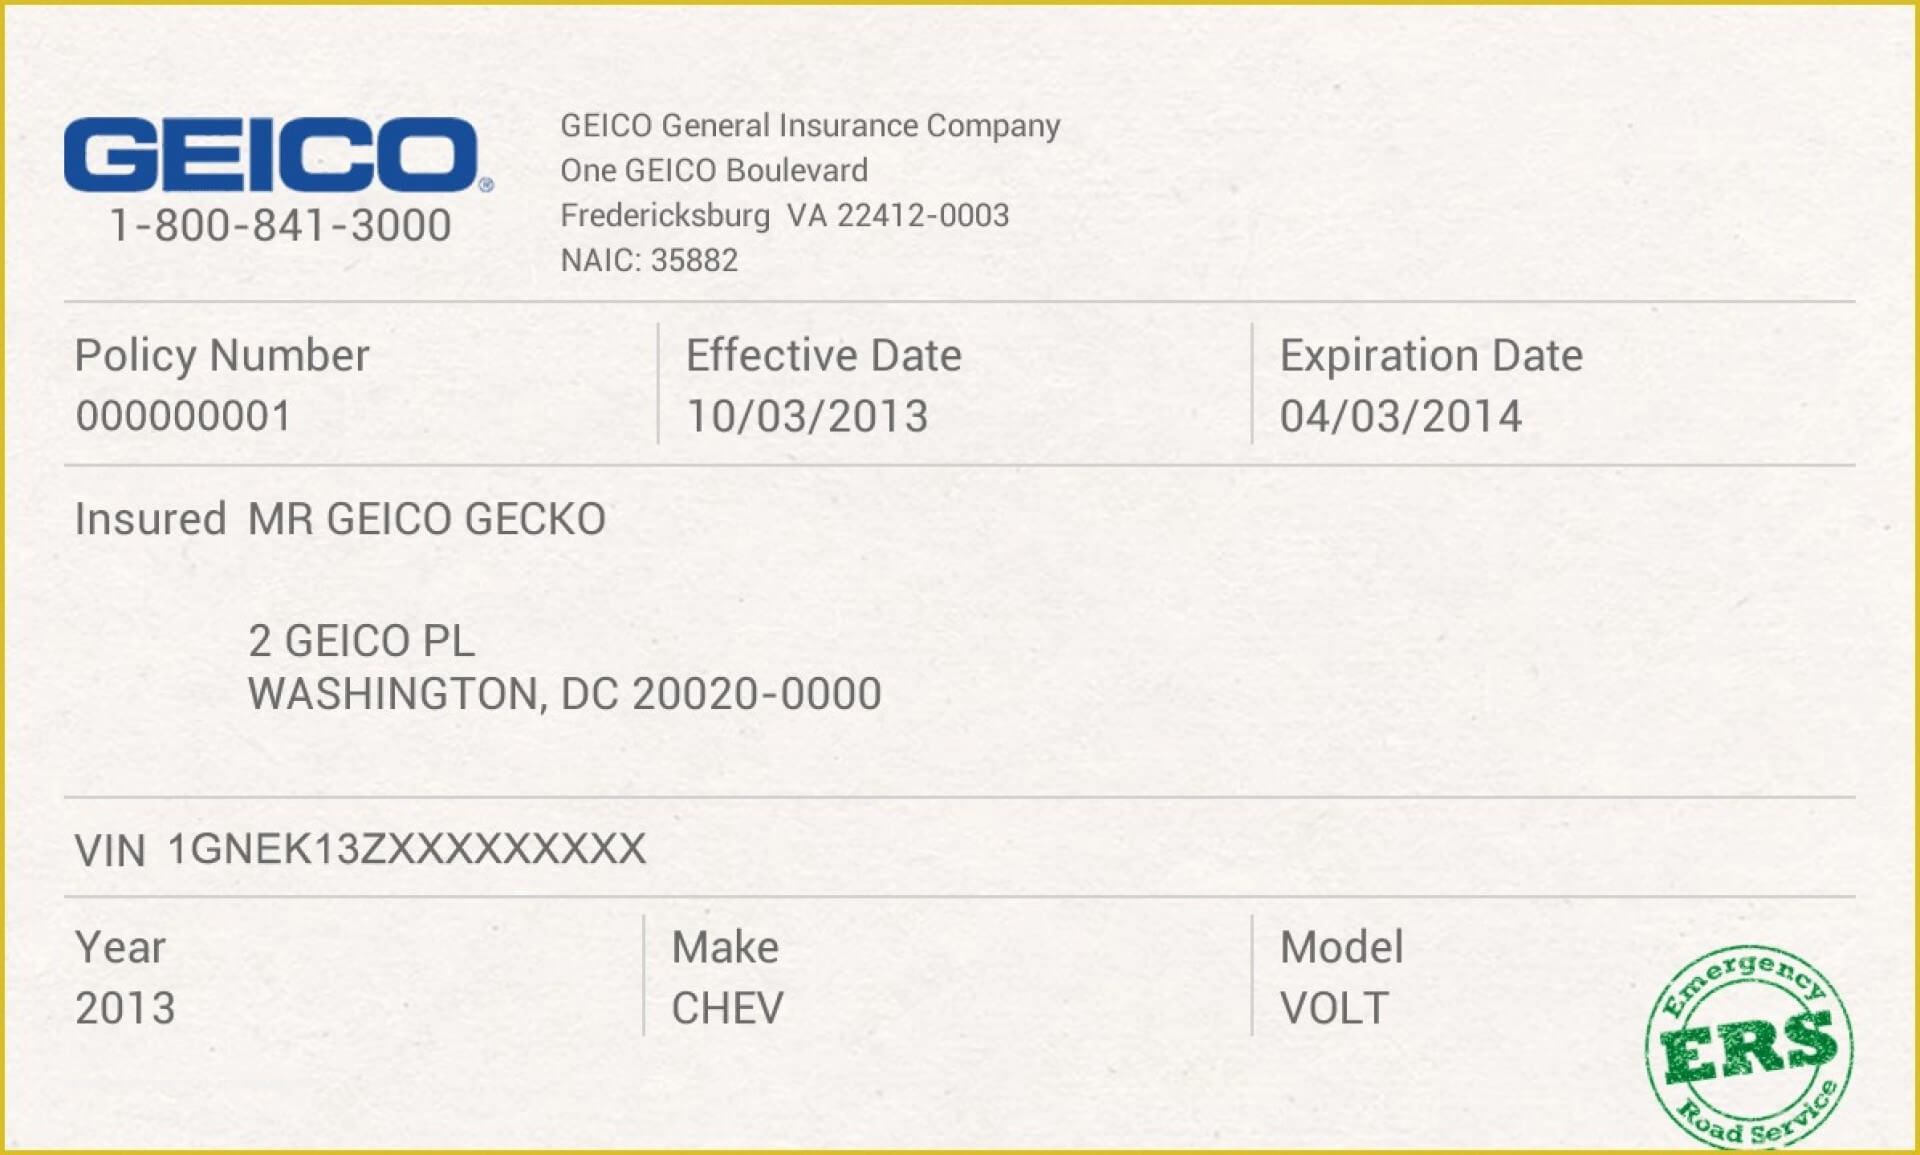 012 Company Car Policy Template Free Auto Insurance Id Card Inside Auto Insurance Card Template Free Download